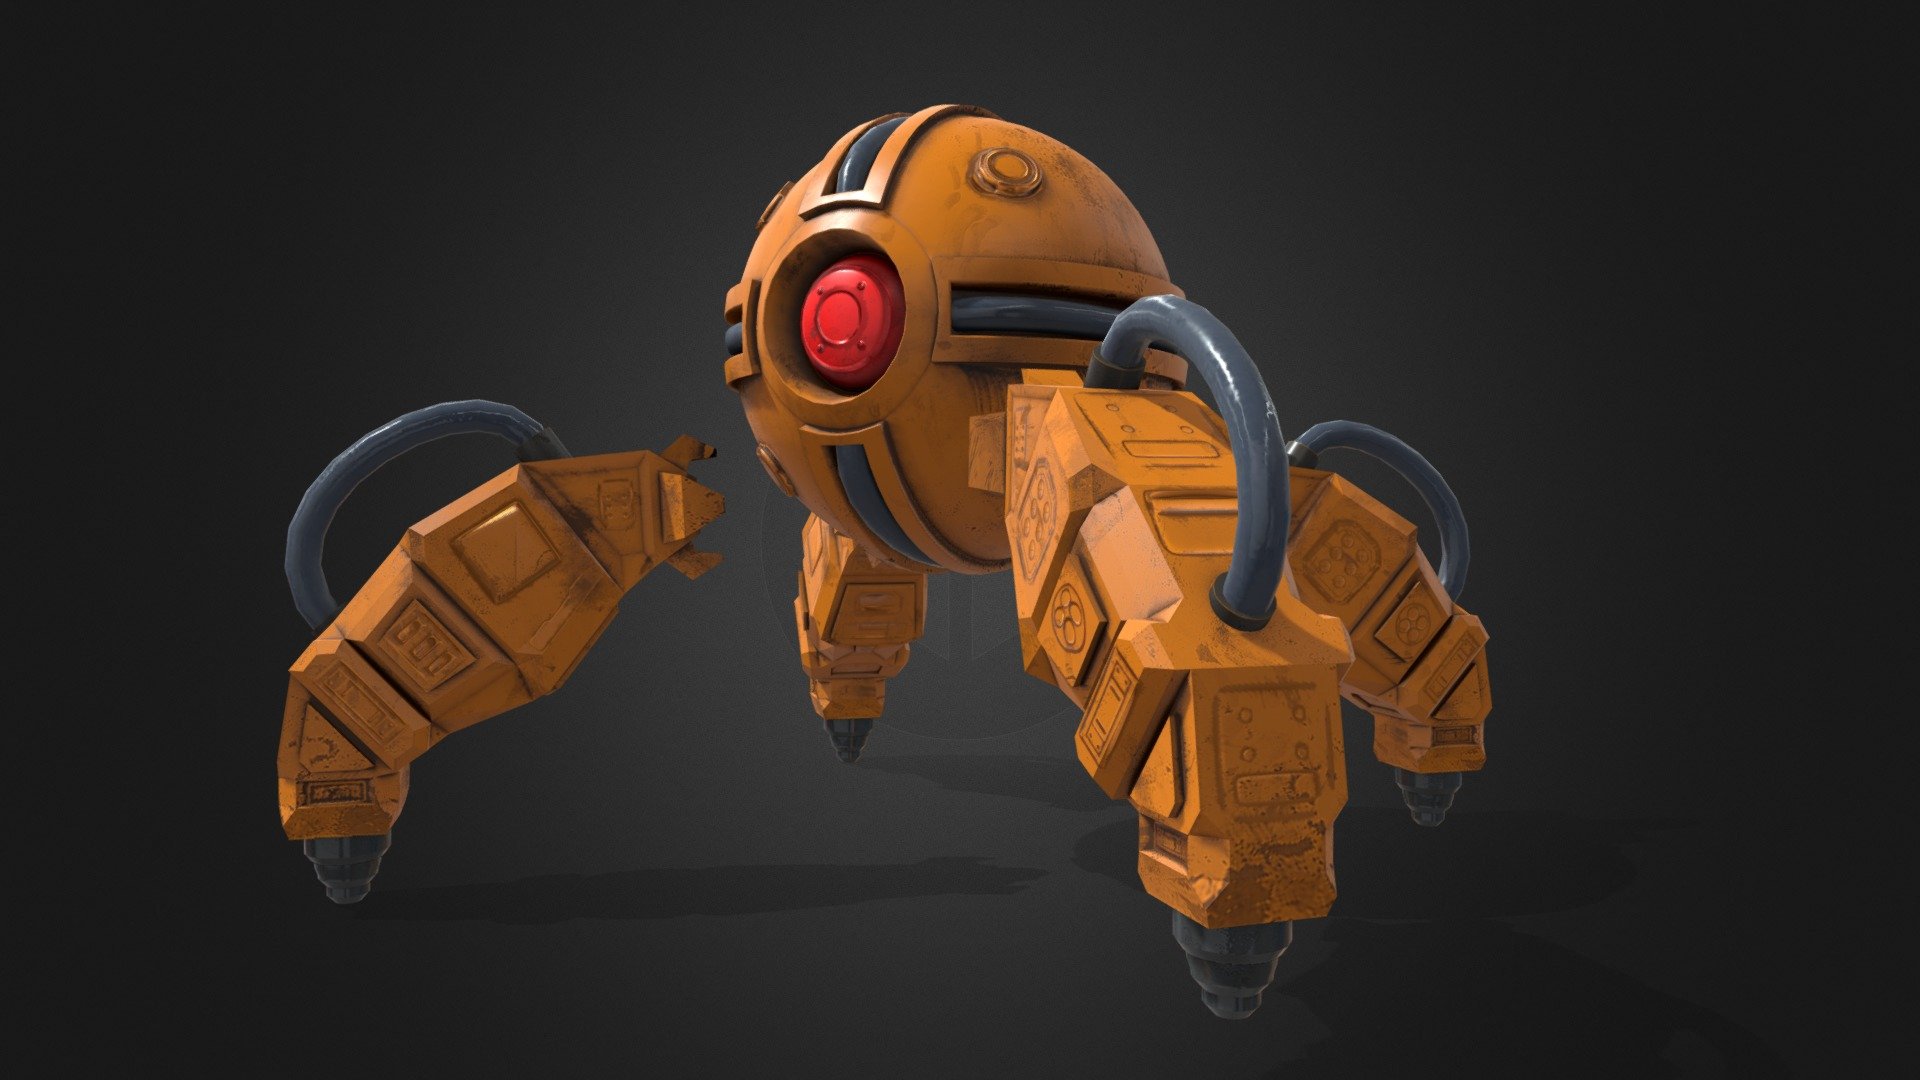 A rigged and animated robot. Includes an example scene (See video demo) 

Comes with 13 animations 

Walk
Fly
Fly (Idle)
Attack Stance
Attack Stance (Idle)
Fire 1
Fire 2
Fire 3
Die (walking)
Die (flying)
Die (attack stance)
Idle
Interact1
Interact2 

Model details 




Verts 10,337 

Bone count 




6

Comes with 3 realistic PBR Textures (2048x2048)
Includes albedo, metallic/smoothness, normal, AO 

For any other questions please feel free to email me at ‘jpholmes122@gmail.com’ - Transforming Robot - Buy Royalty Free 3D model by Holmes Motion (@jpholmes122) 3d model